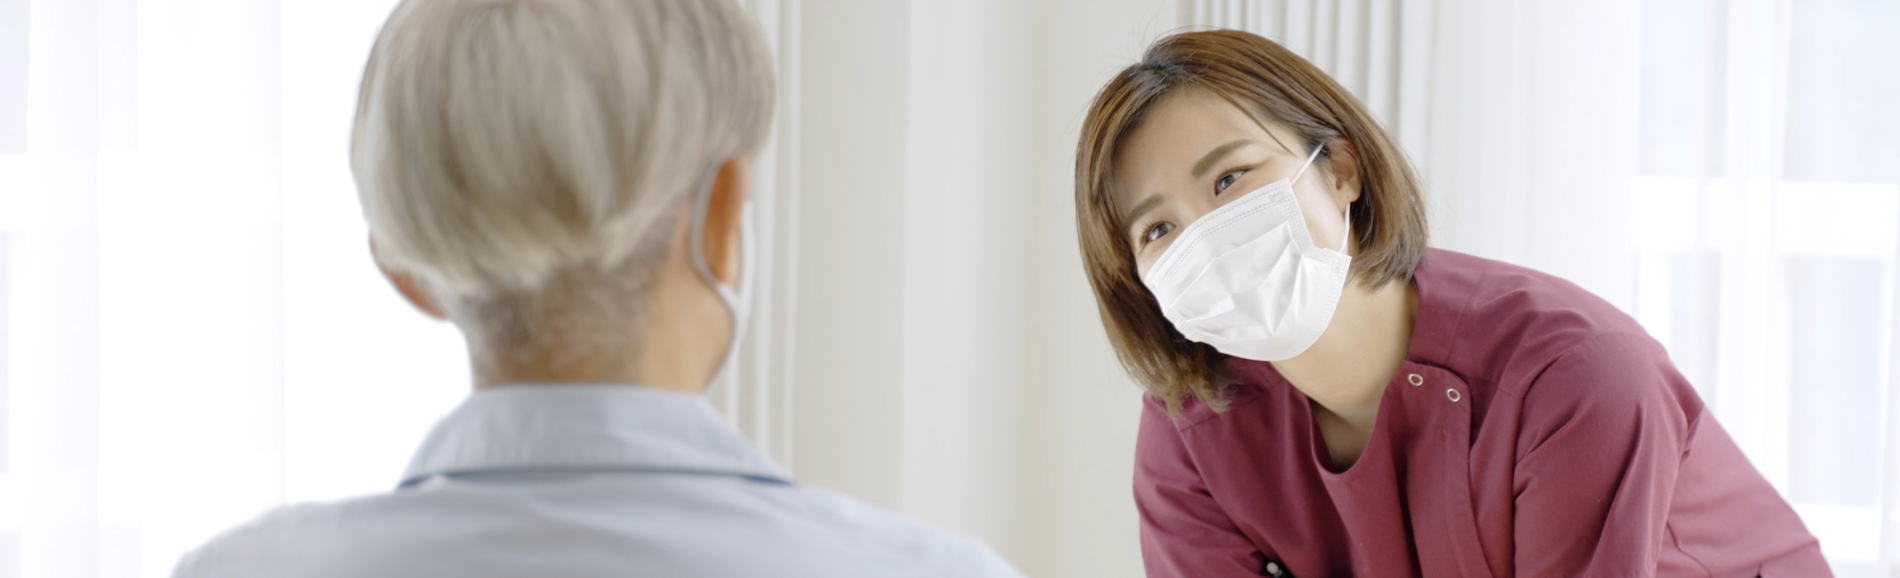 Support worker wearing mask looking kindly at resident in mask